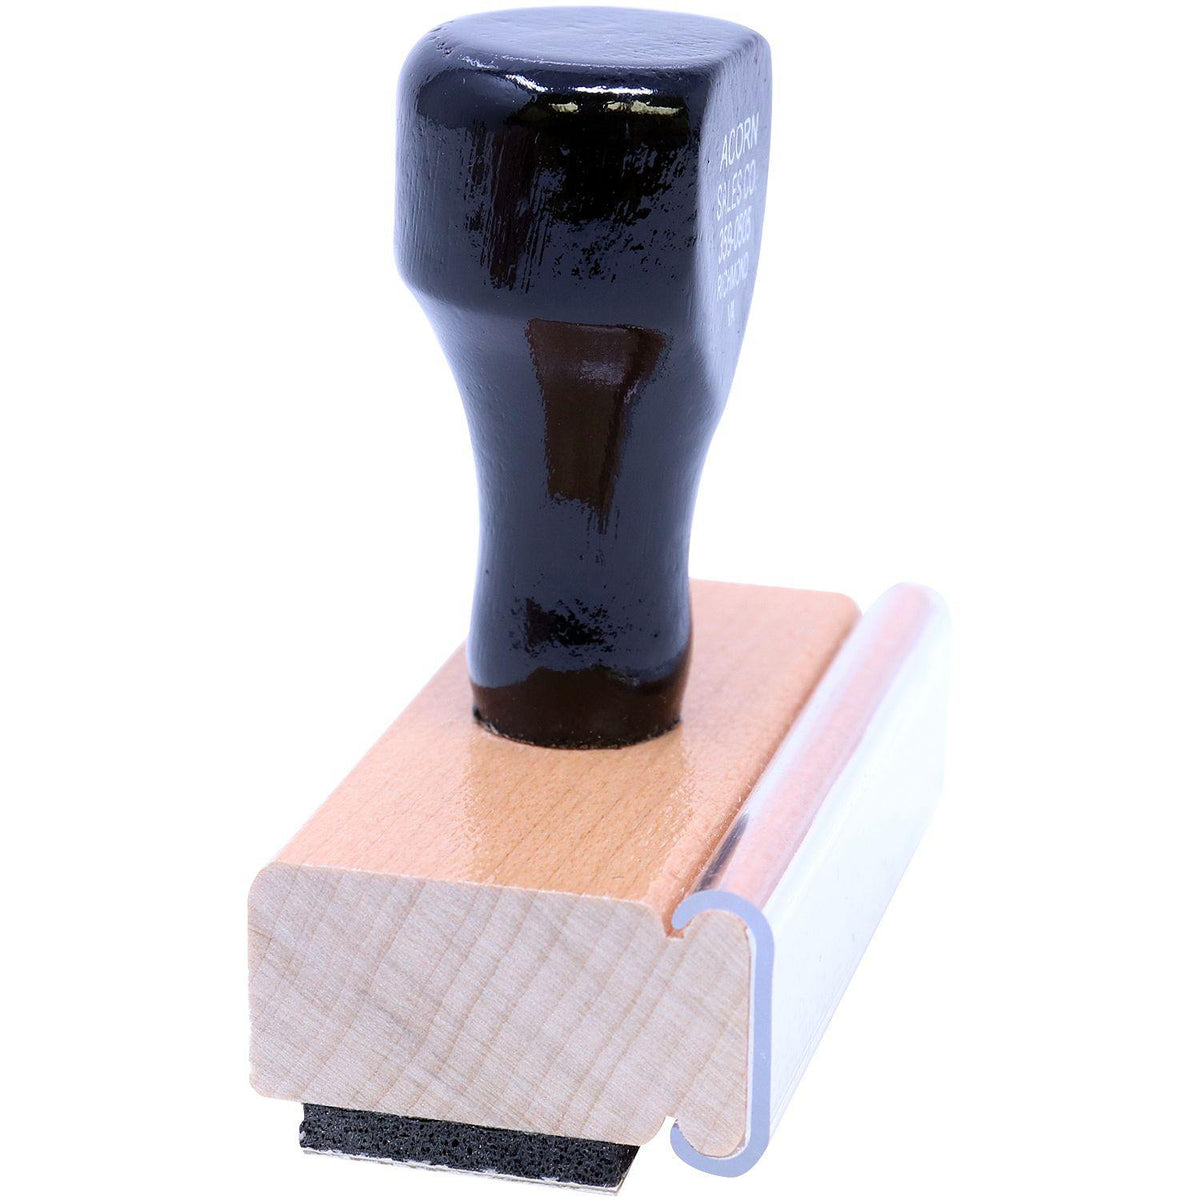 Side View of Large Homework Complete Rubber Stamp at an Angle